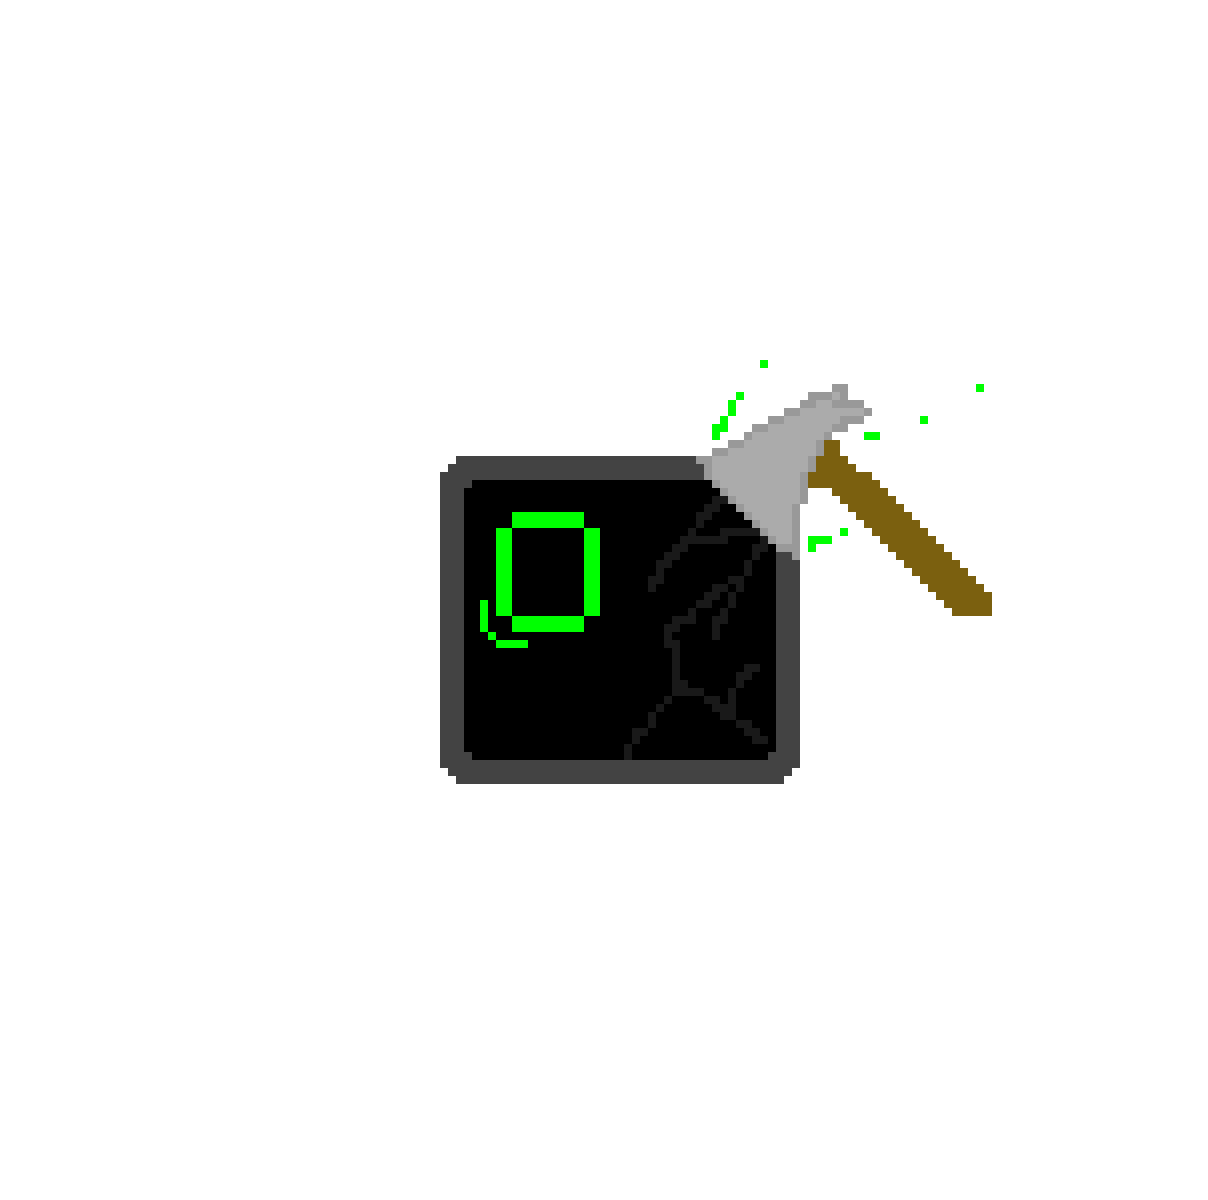 challenge-i-added-a-hammer-with-some-cracks-on-the-screen-with-some-sparks-kit-the-computer-returns